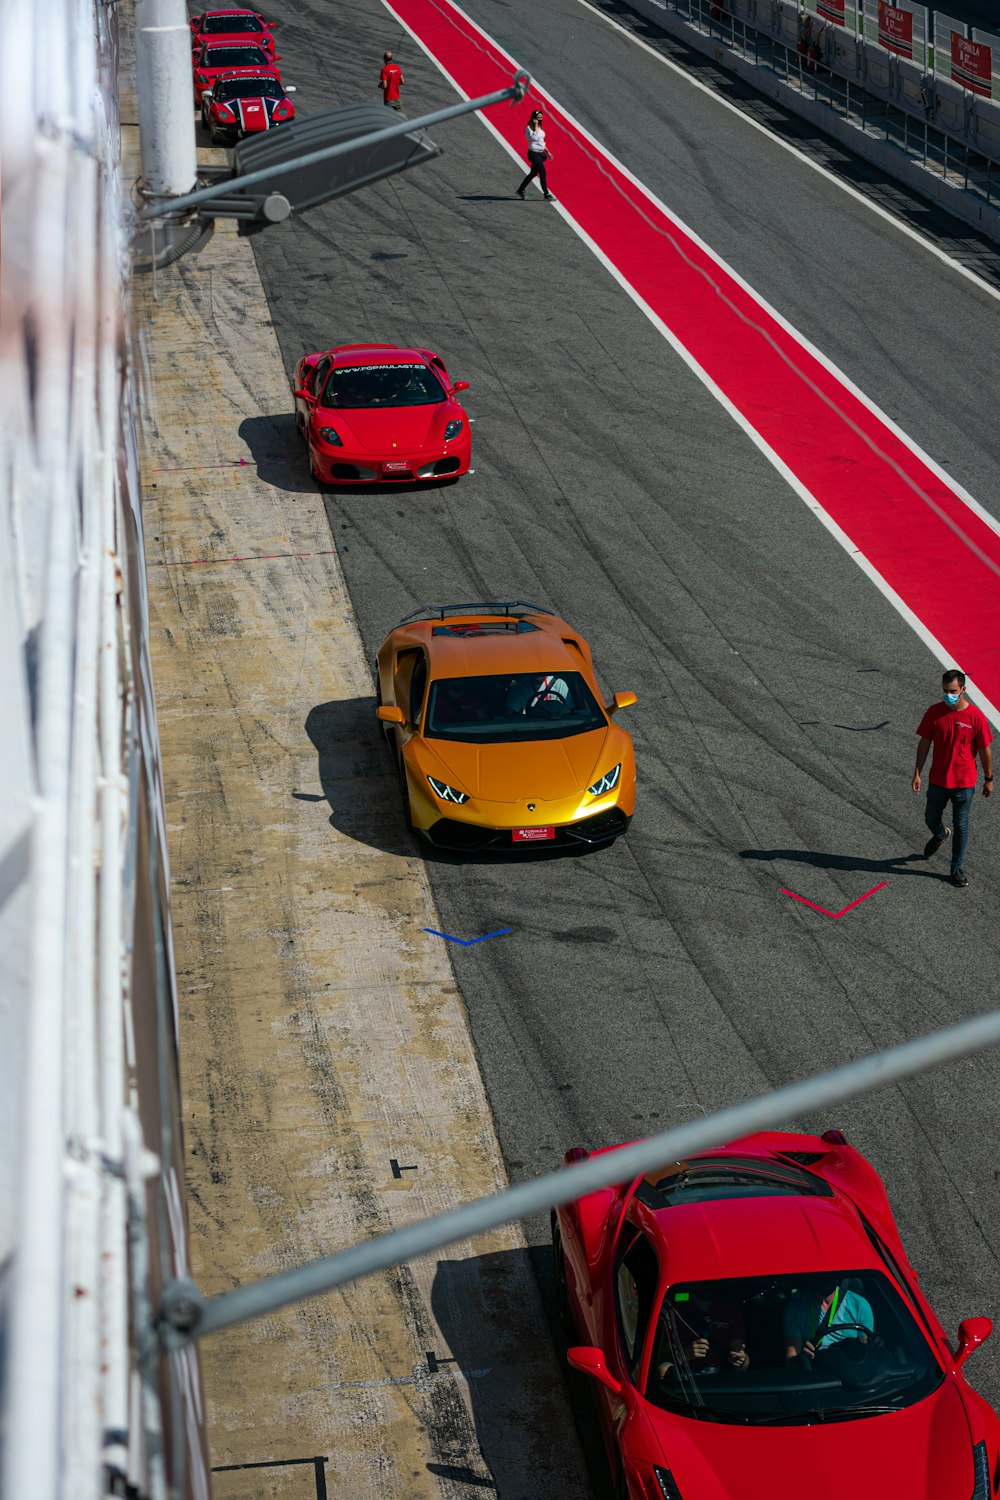 a red car and a yellow car on a race track